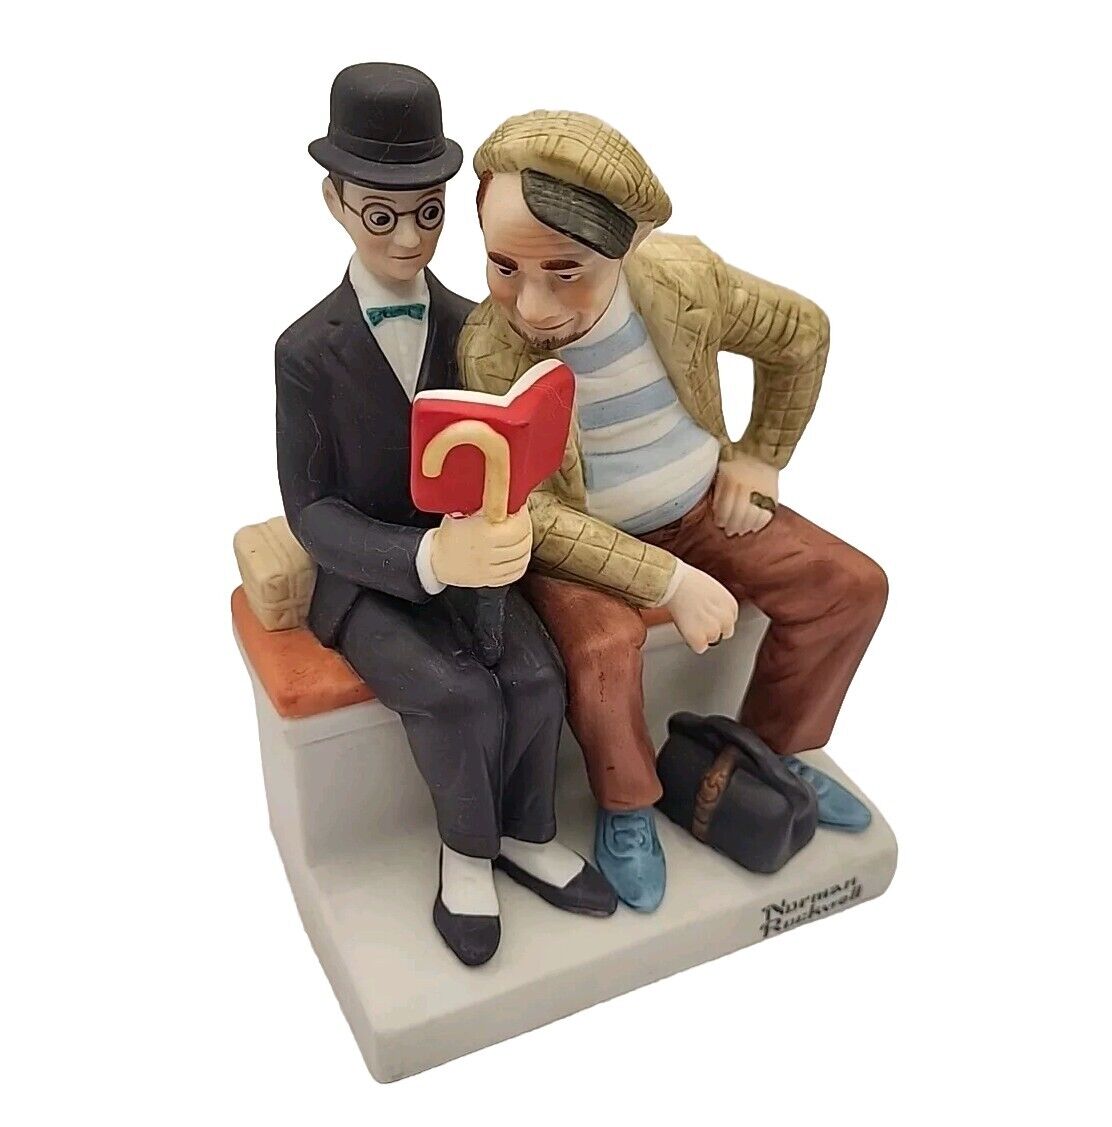 The 12 Norman Rockwell Porcelain Figurine \